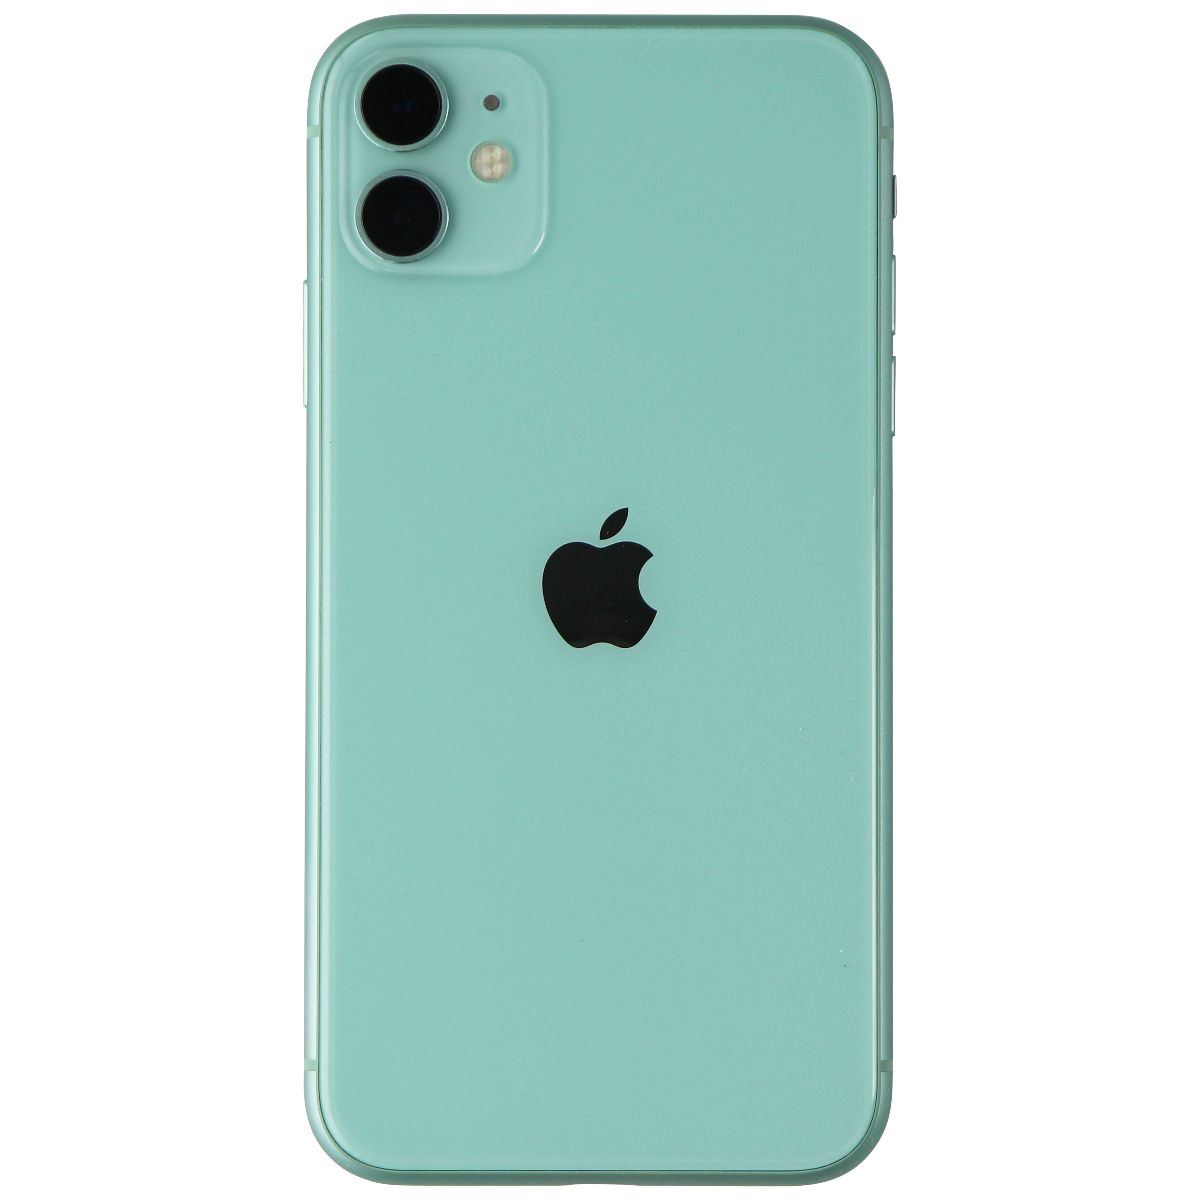 Apple iPhone 11 (6.1-inch) Smartphone (A2111) Spectrum Only - 64GB / Green Cell Phones & Smartphones Apple    - Simple Cell Bulk Wholesale Pricing - USA Seller